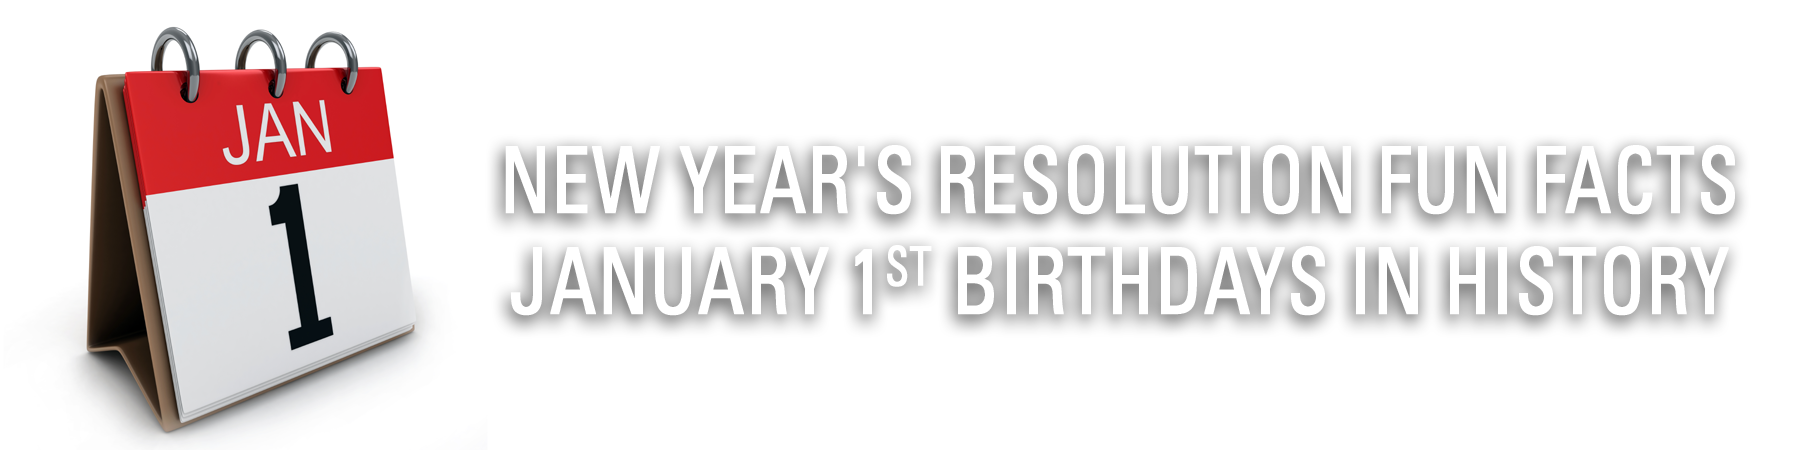 New Year's Resolution Fun Facts - January 1st Birthdays in History